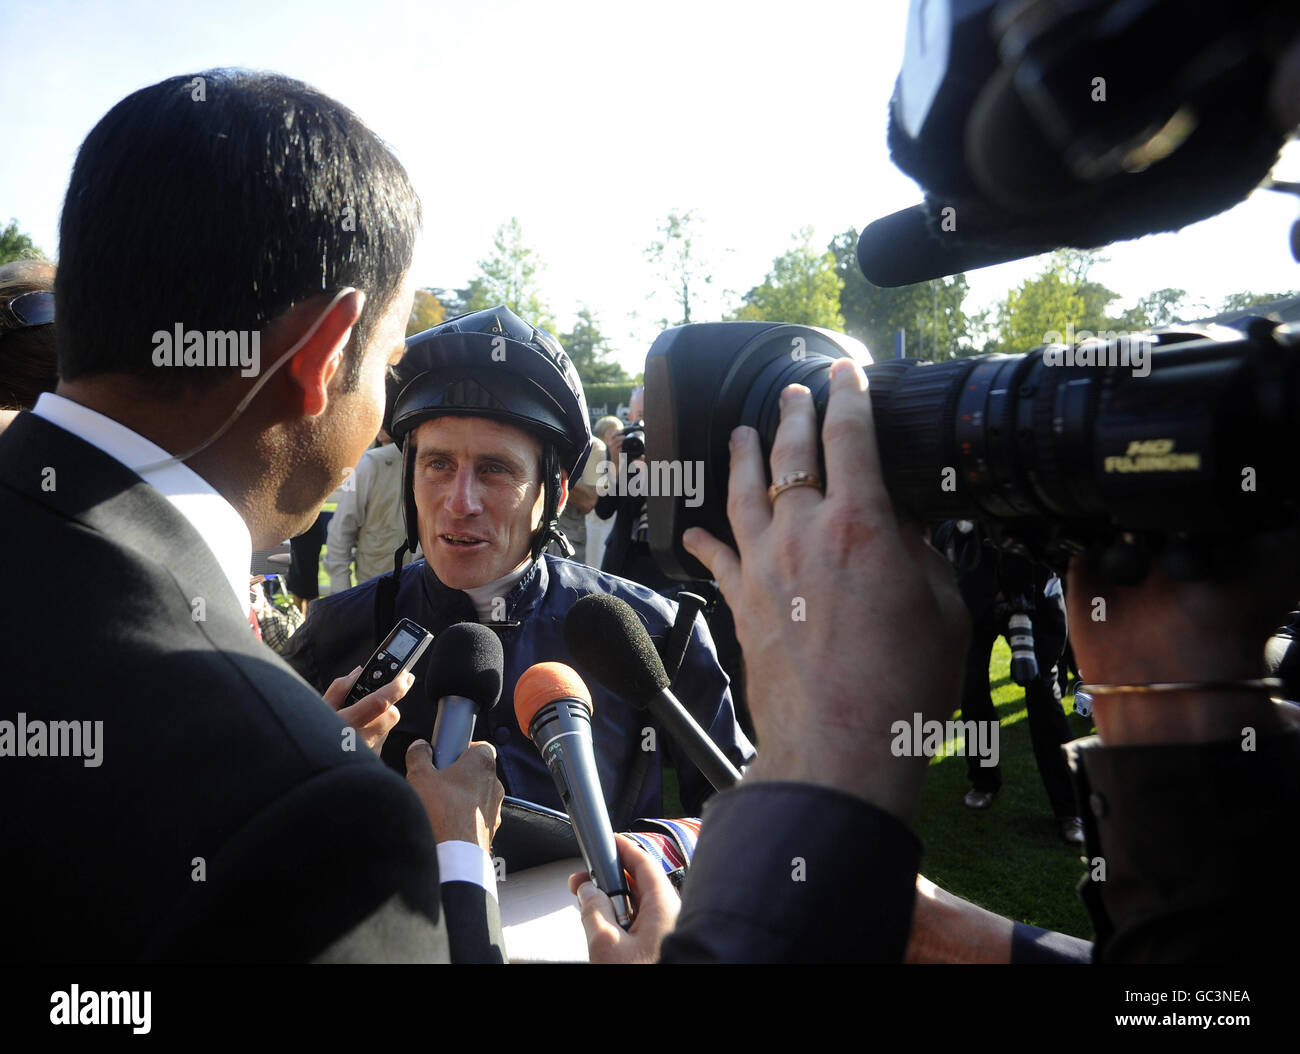 Johnny Murtagh is interviewed after winning The Queen Elizabeth II Stakes on Rip Van Winkle during the Third Ascot Racecourse Beer Festival at Ascot Racecourse, Ascot. Stock Photo